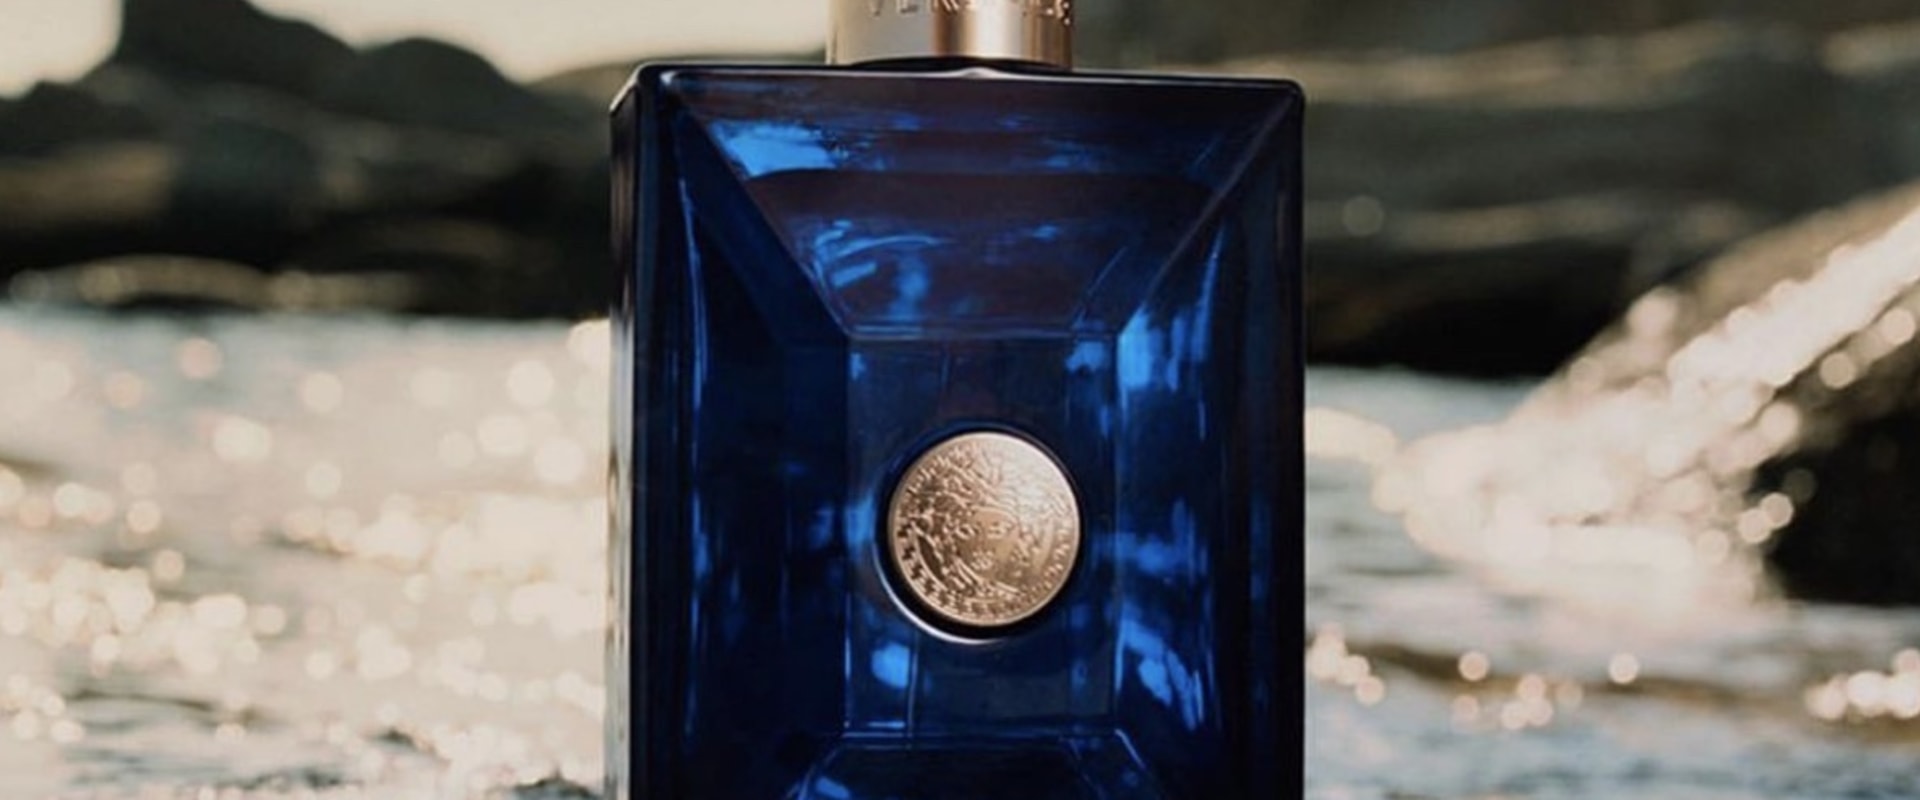 Versace Perfumes and Colognes: Fragrances that Define You